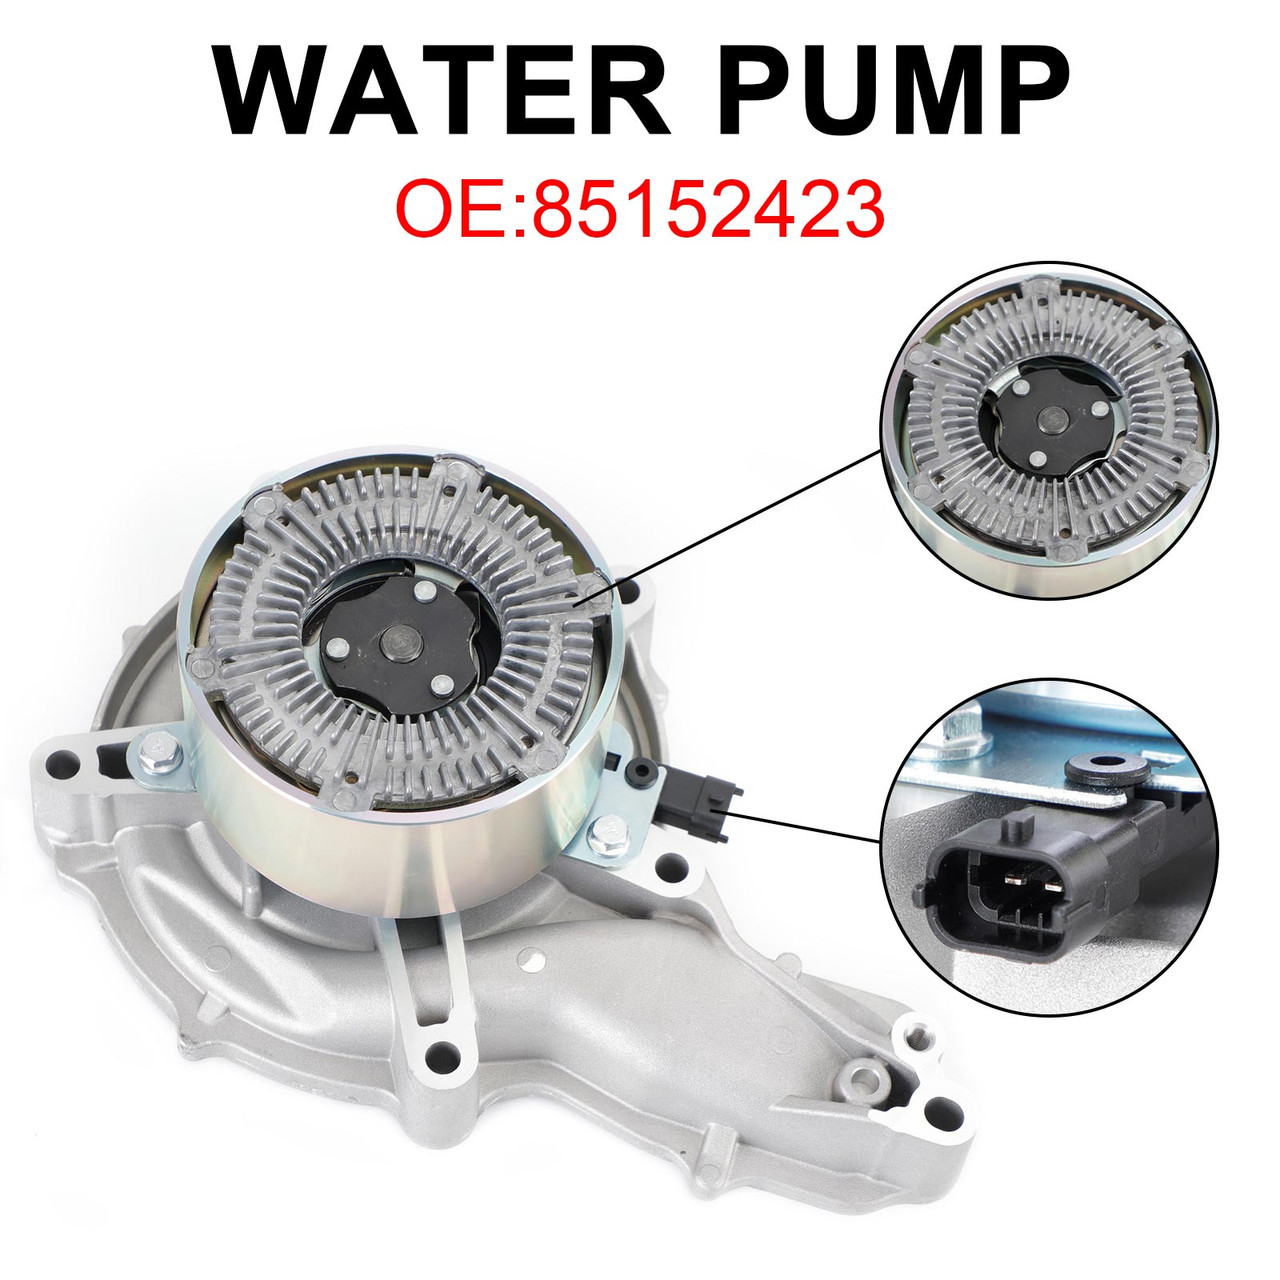 Water Pump for Volvo Truck D13 D16 & Mack MP8 85151110,85152423,22183231